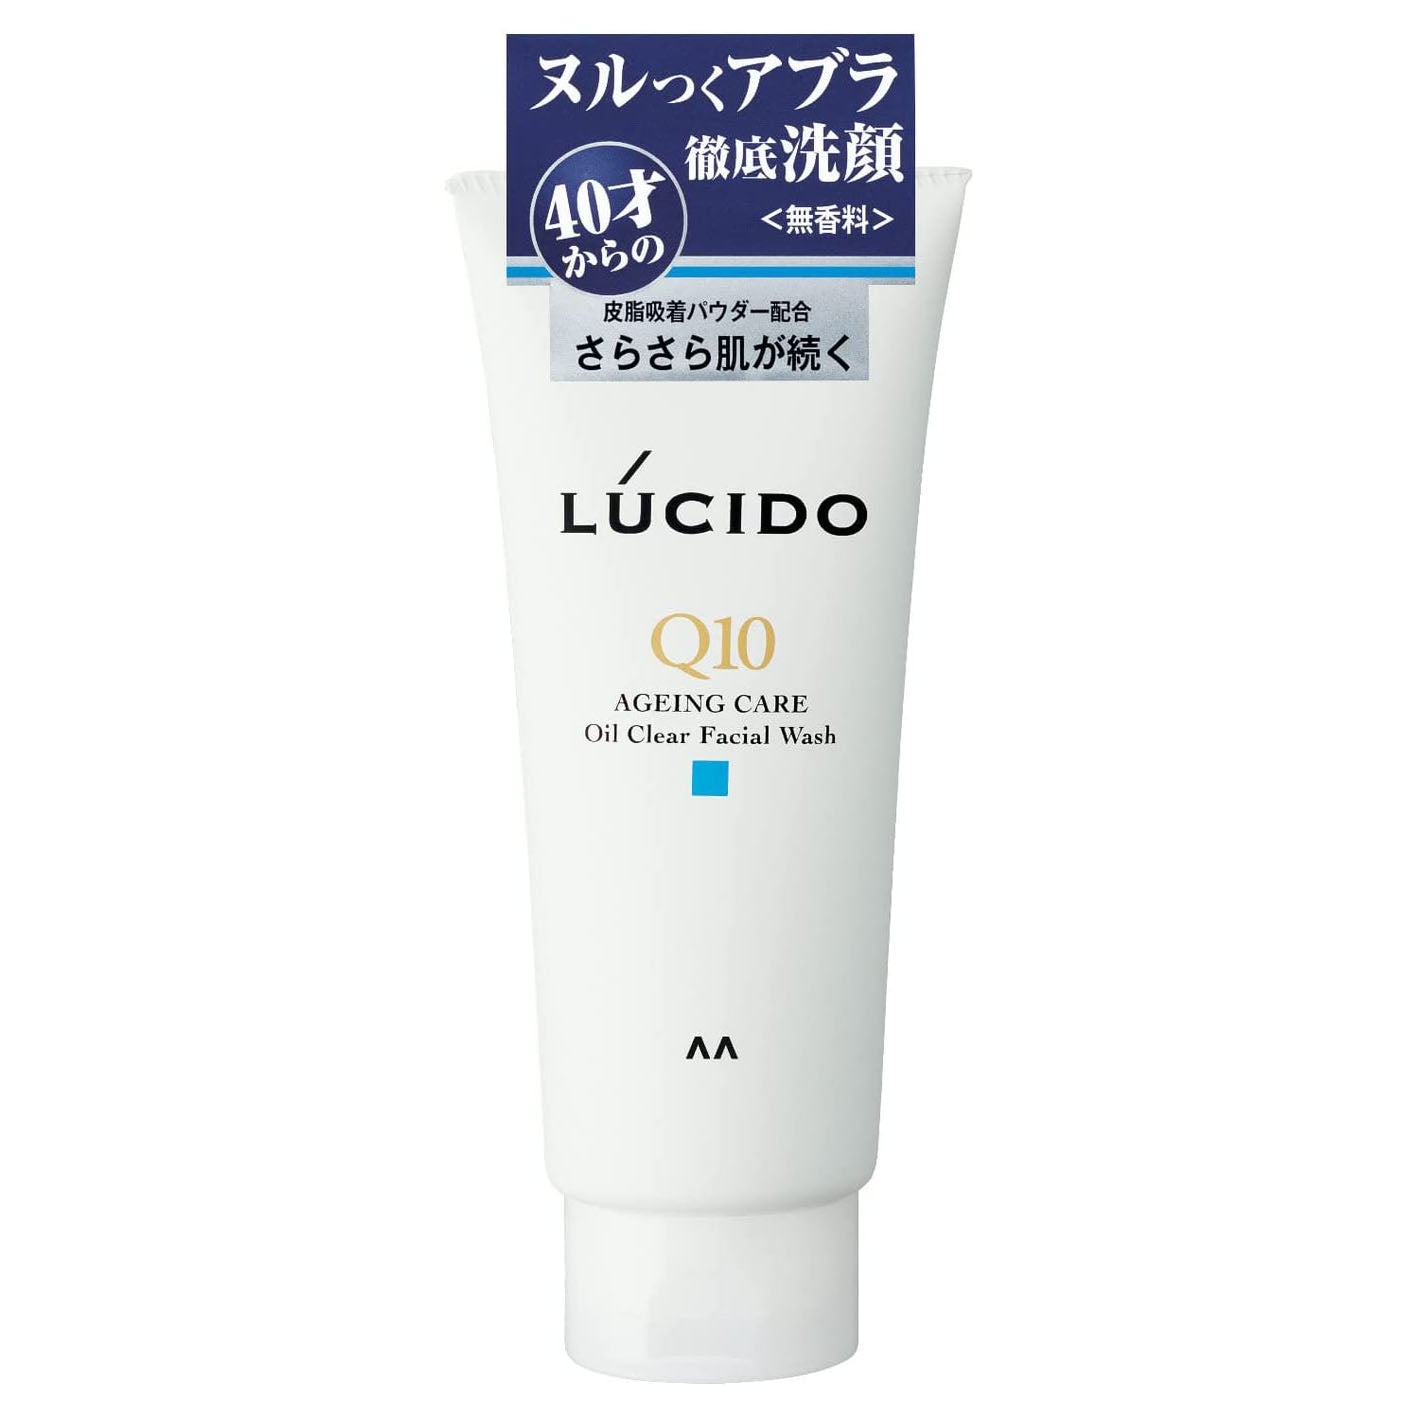 Lucido Ageing Care Oil Clear Face Wash 130g - Harajuku Culture Japan - Japanease Products Store Beauty and Stationery